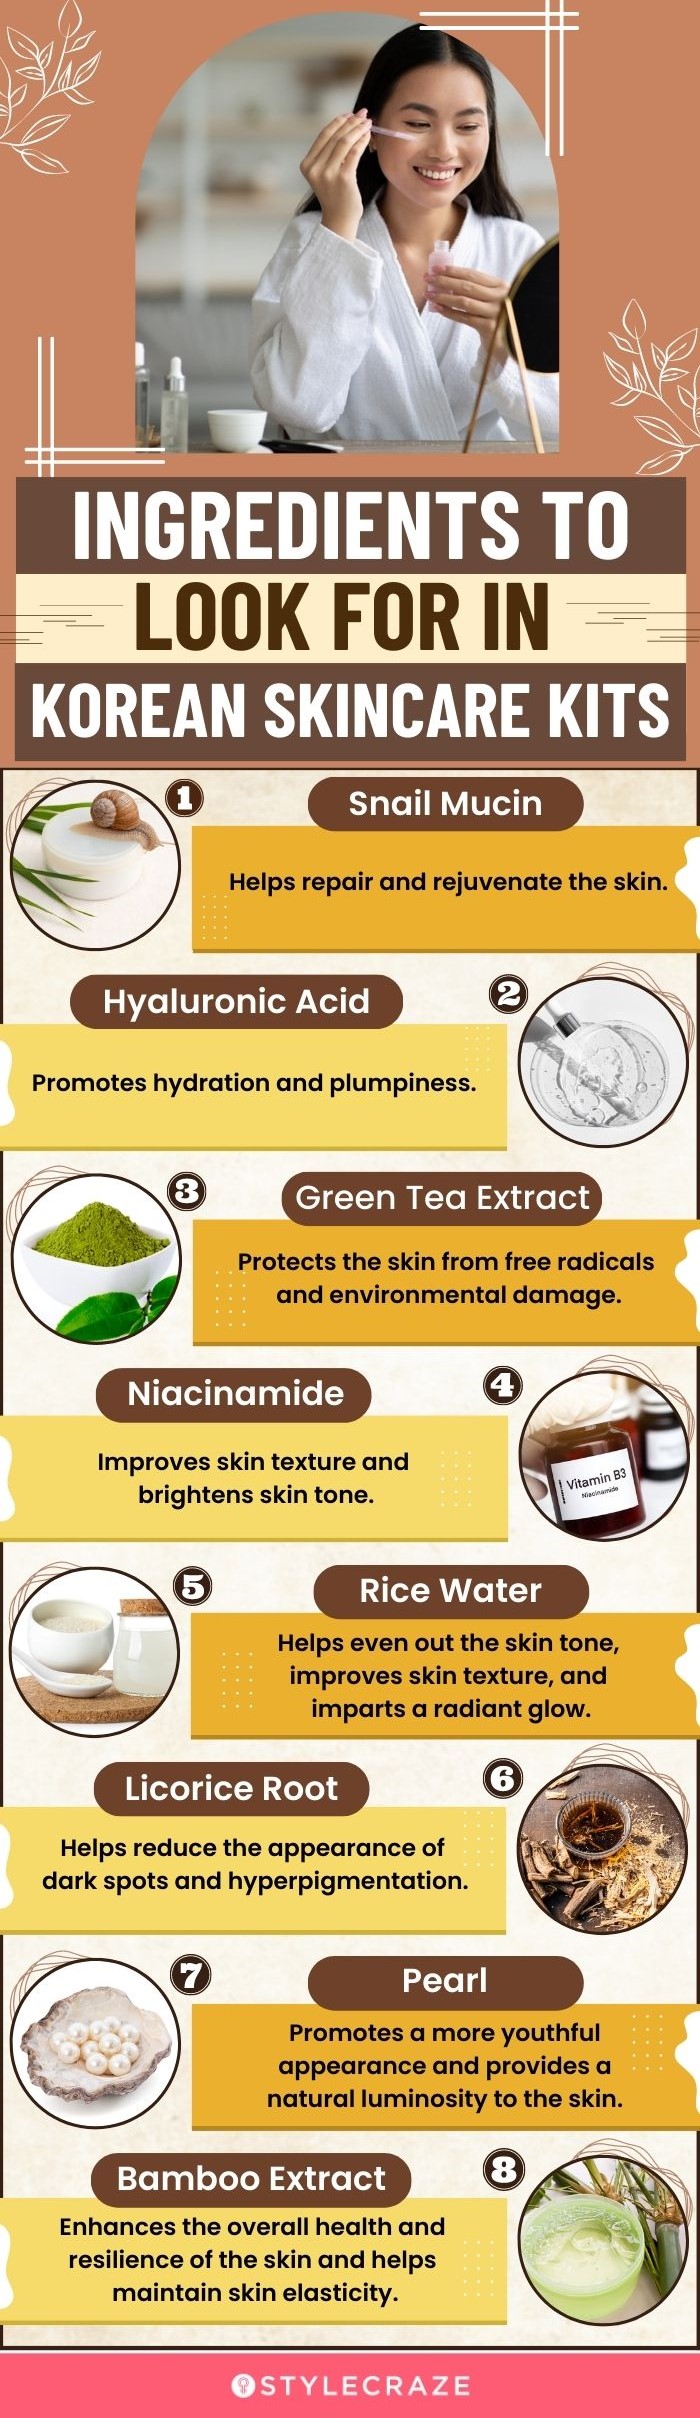 Ingredients To Look For In Korean Skin Care Kits (infographic)